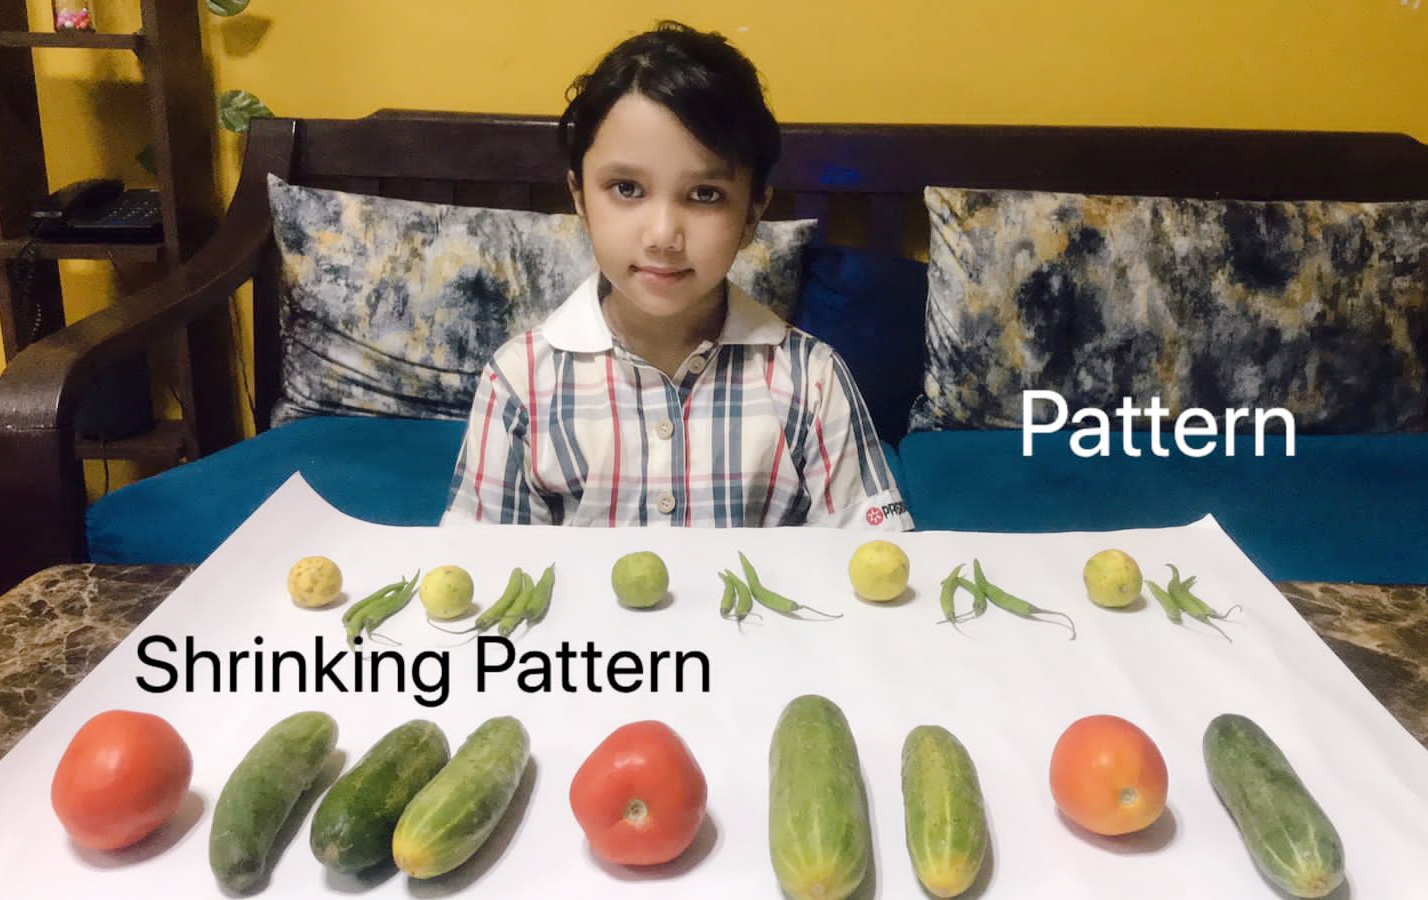 Presidium Dwarka-6, STUDENTS LEARN ABOUT THE DIFFERENT TYPES OF PATTERNS